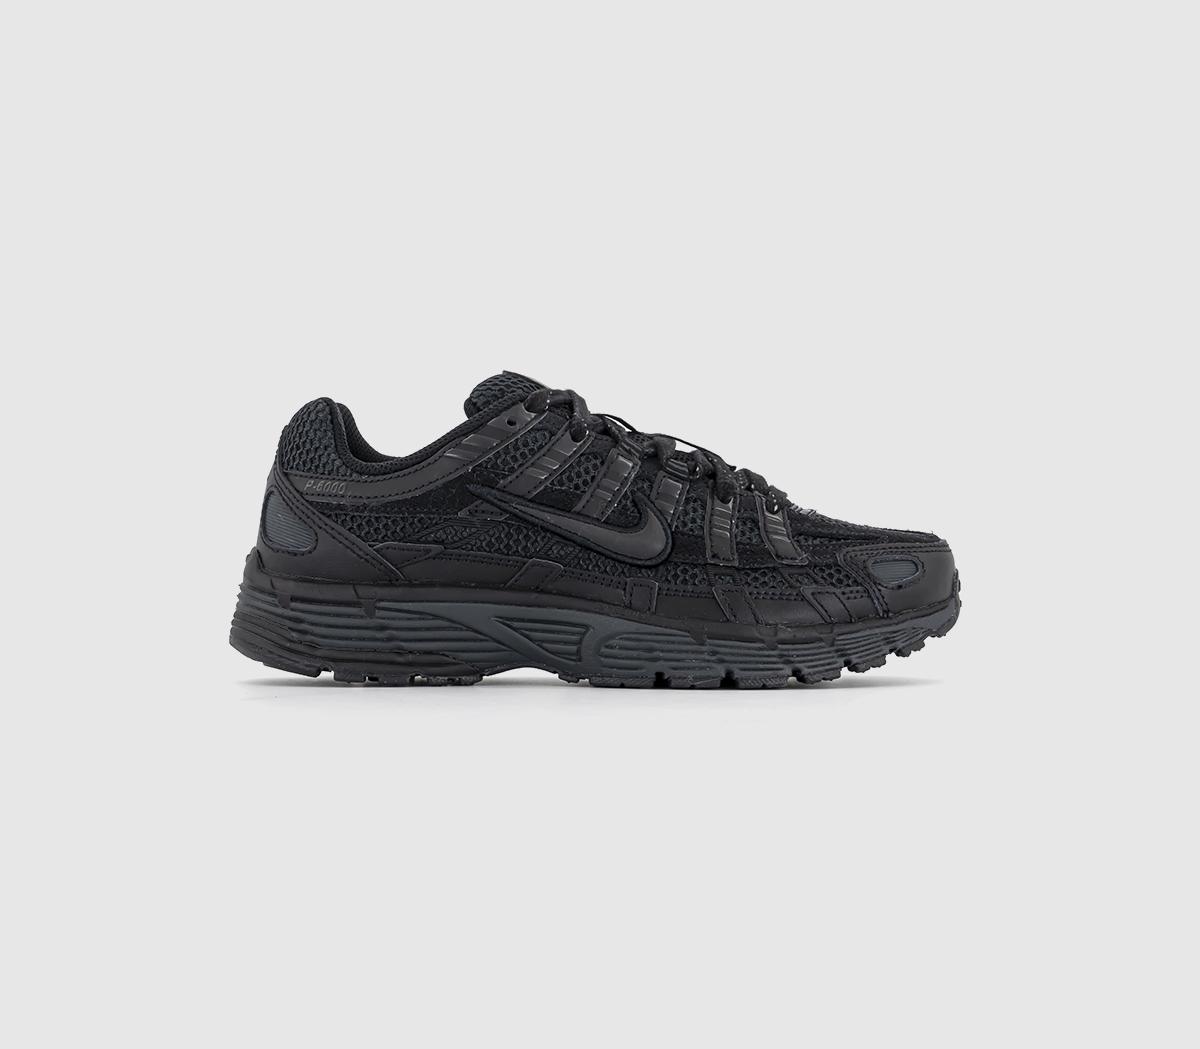 NikeP-6000 Trainers Black Black Anthracite